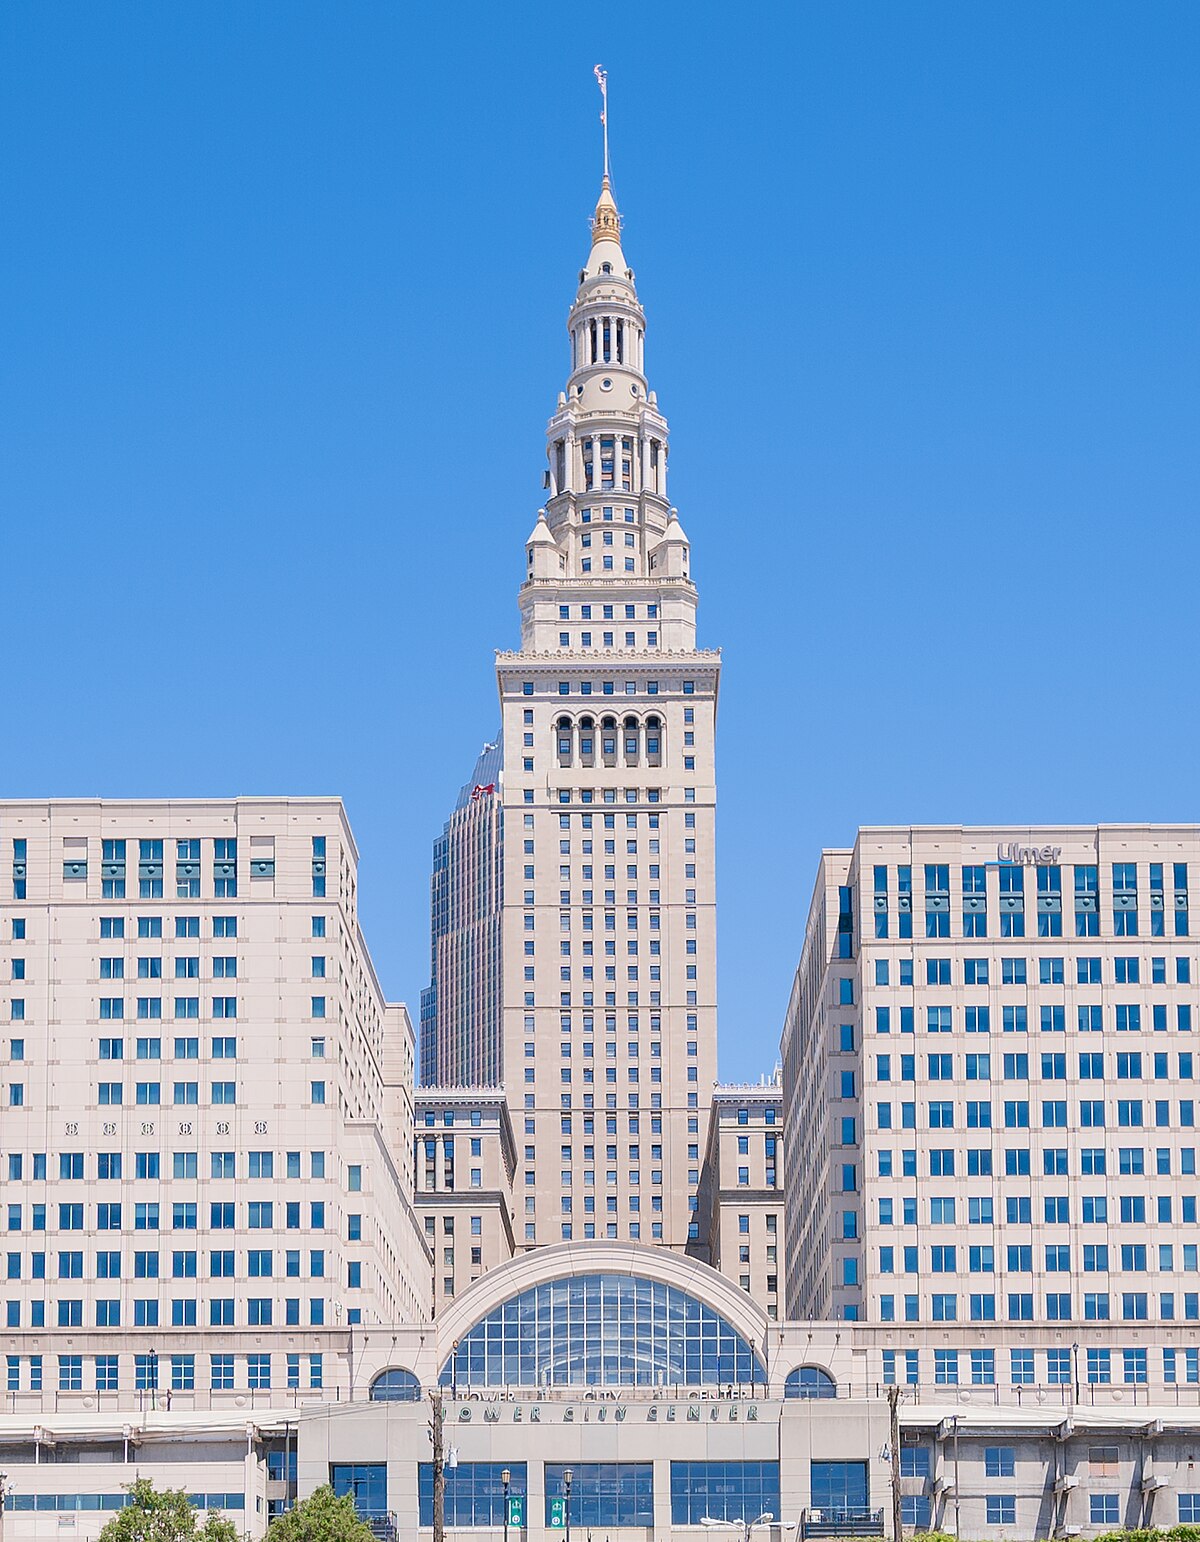 https://upload.wikimedia.org/wikipedia/commons/thumb/1/15/Terminal_Tower_from_Cuyahoga_River_Cropped.jpg/1200px-Terminal_Tower_from_Cuyahoga_River_Cropped.jpg